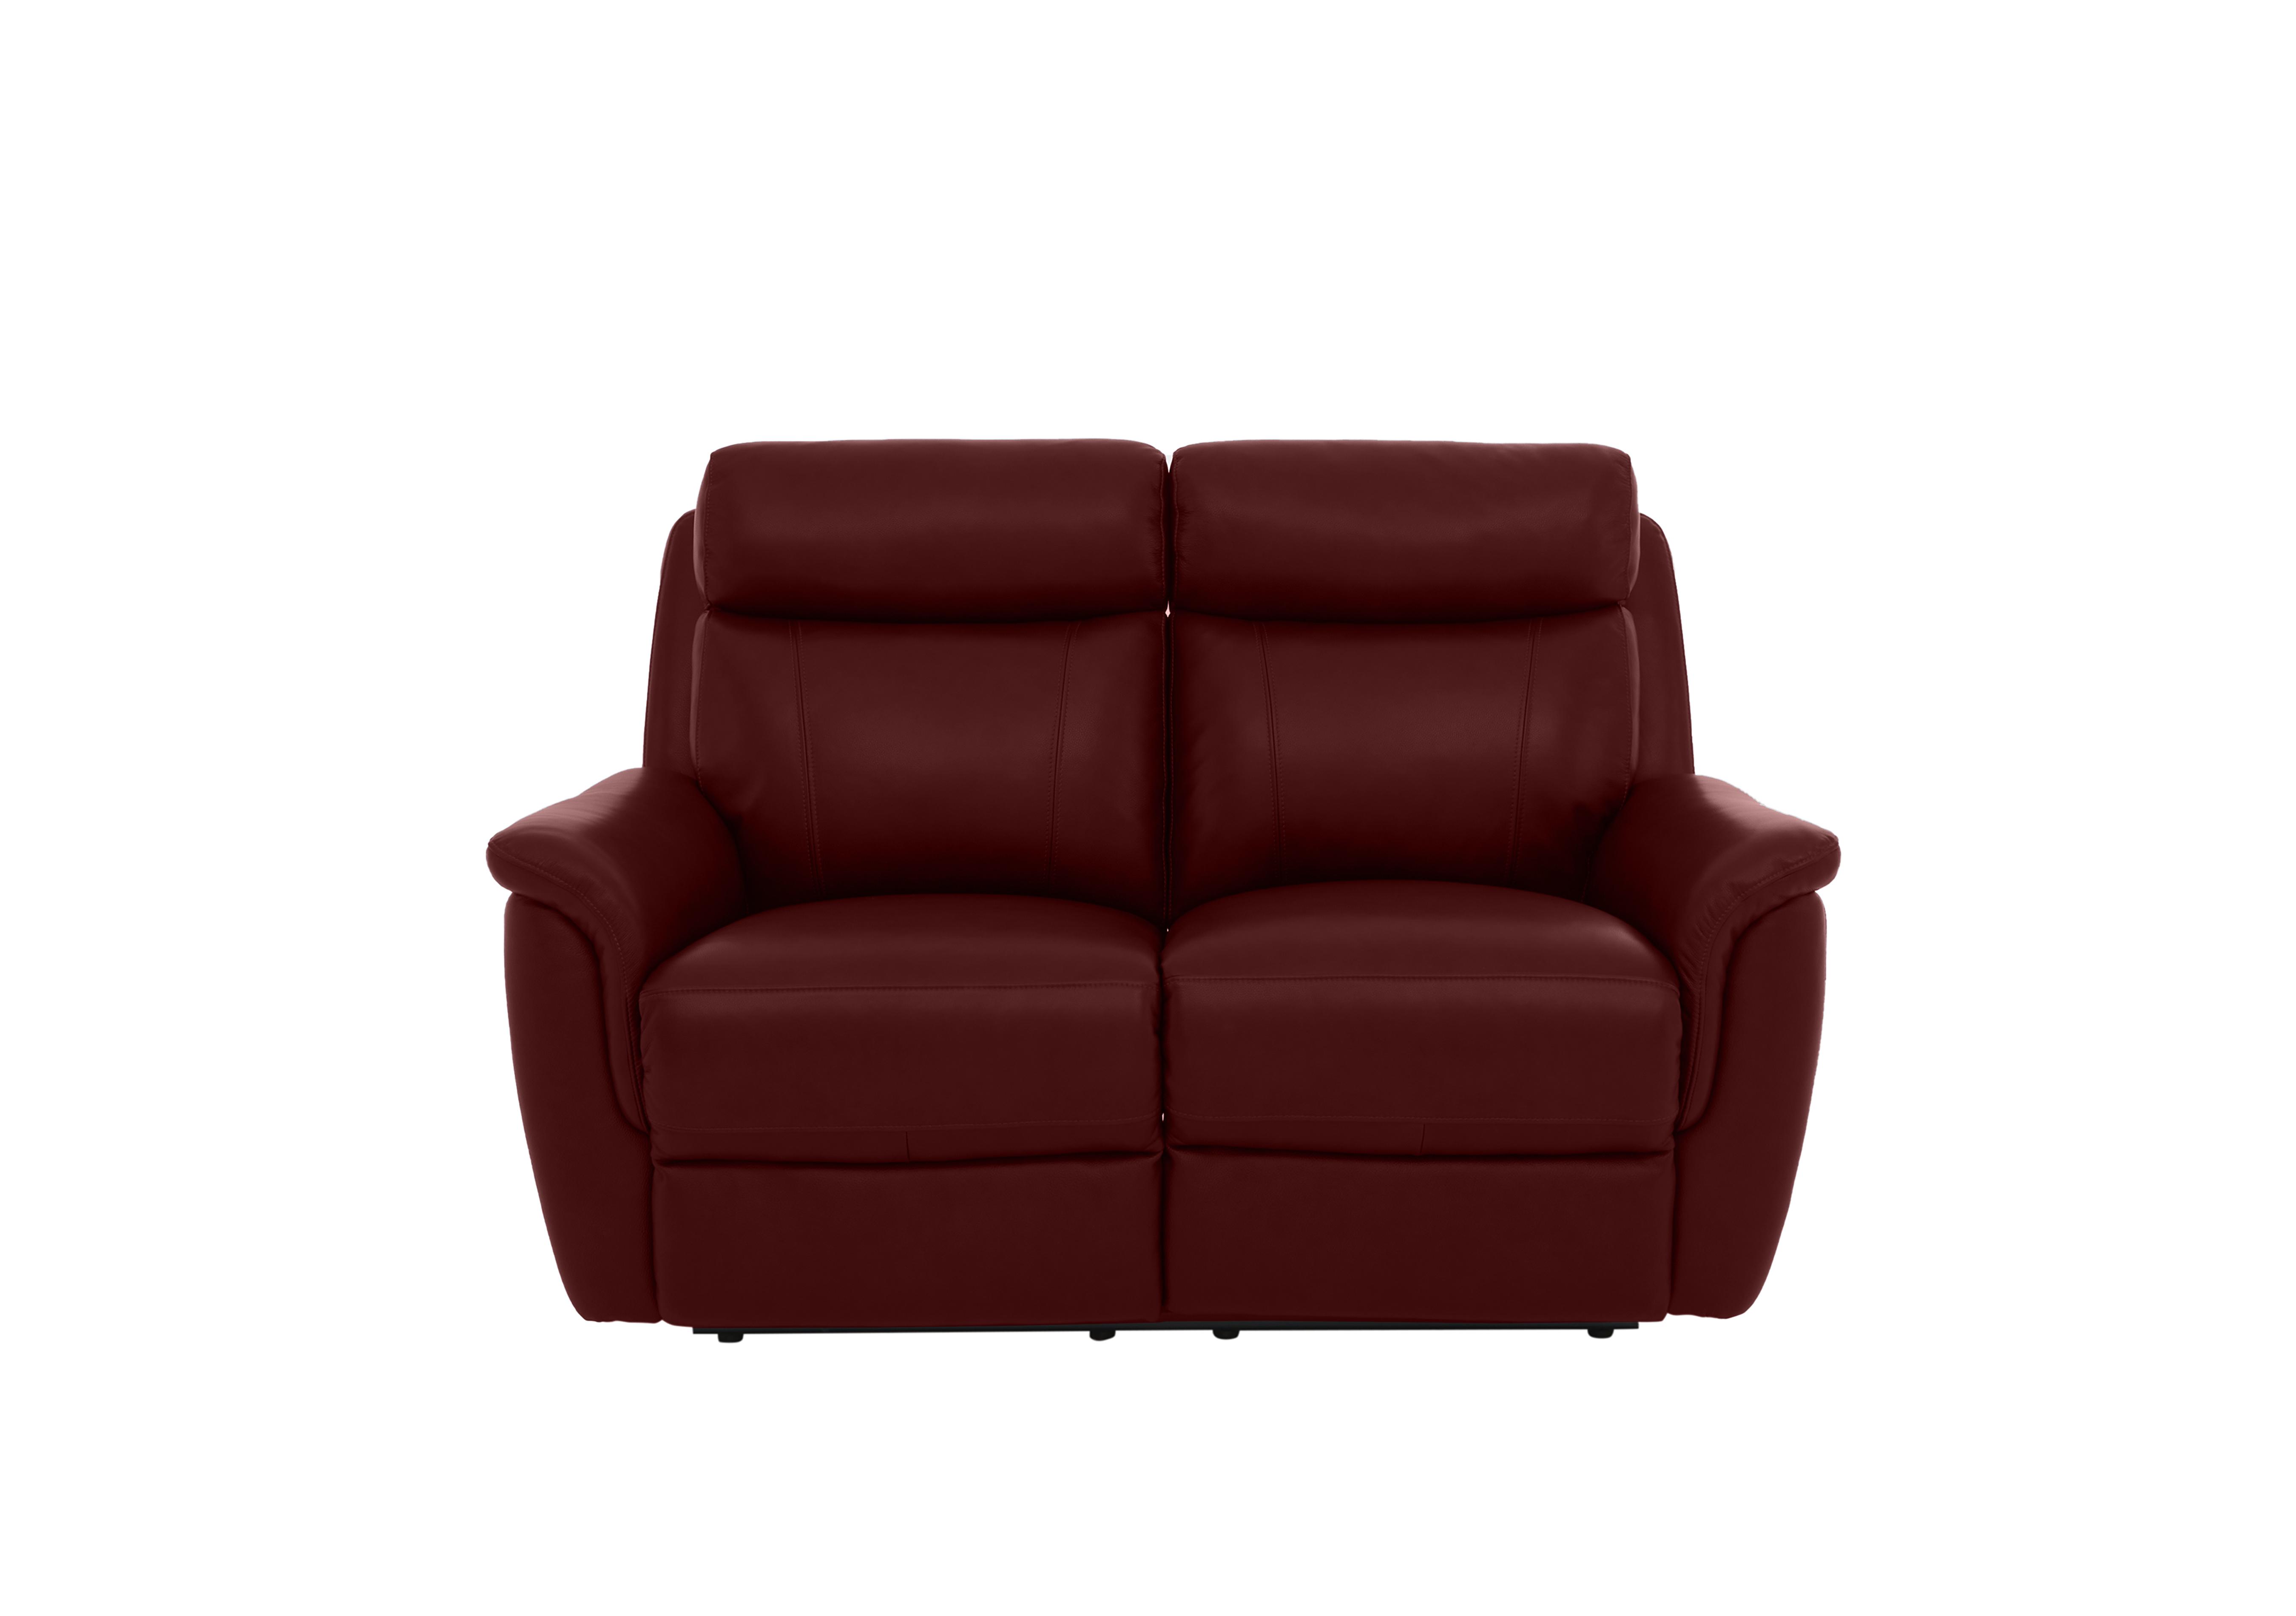 Orlando 2 Seater Leather Power Recliner Sofa with Power Headrests in 60/15 Ruby on Furniture Village